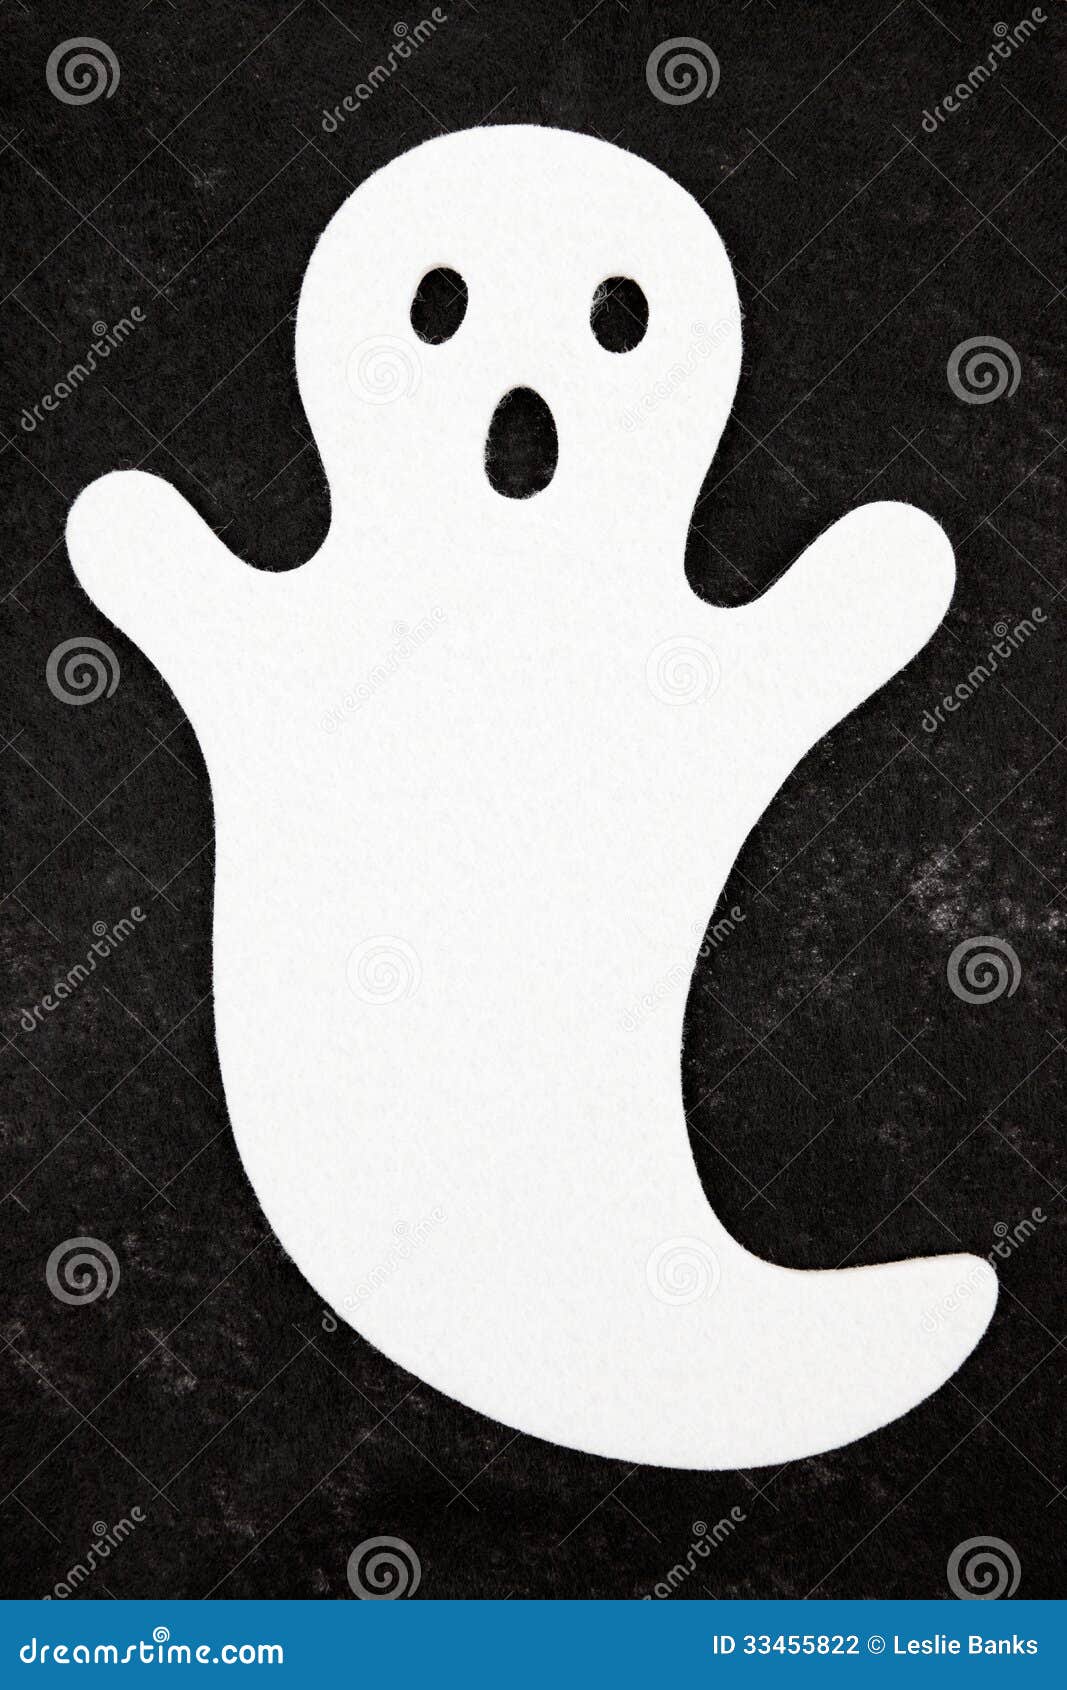 White Ghost On Black Background Stock Photography - Image: 33455822